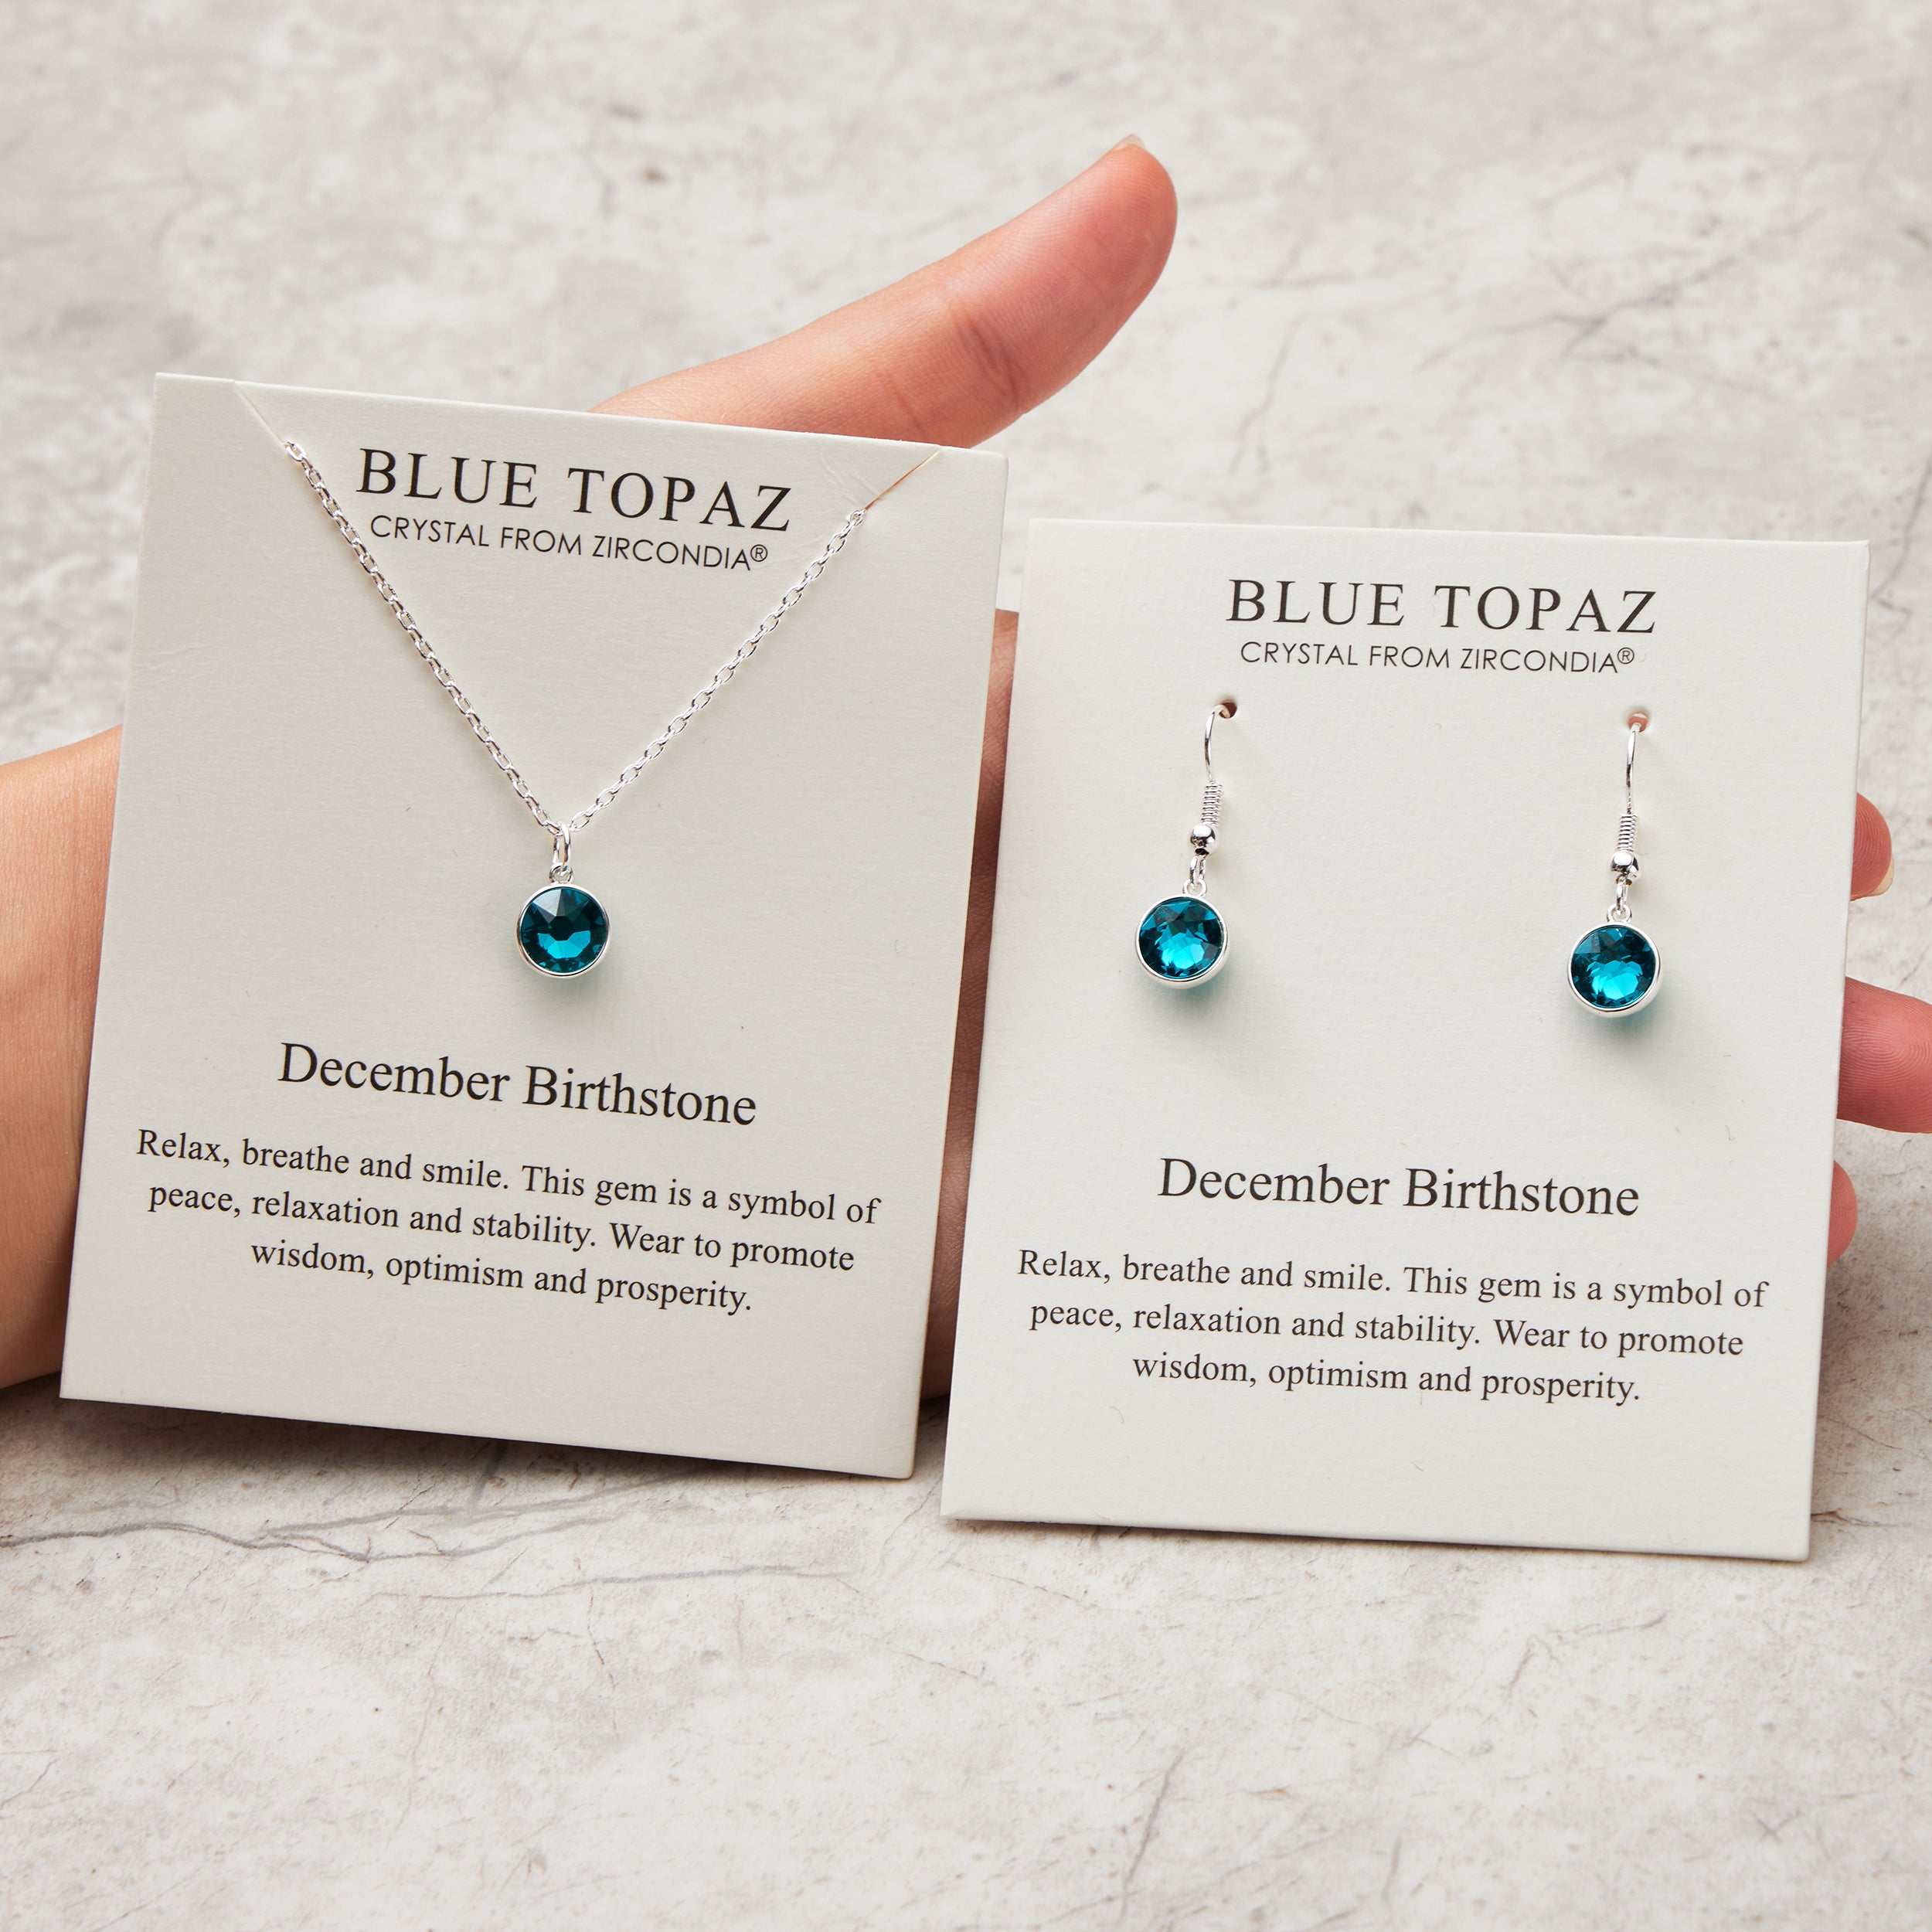 December (Blue Topaz) Birthstone Necklace & Drop Earrings Set Created with Zircondia® Crystals